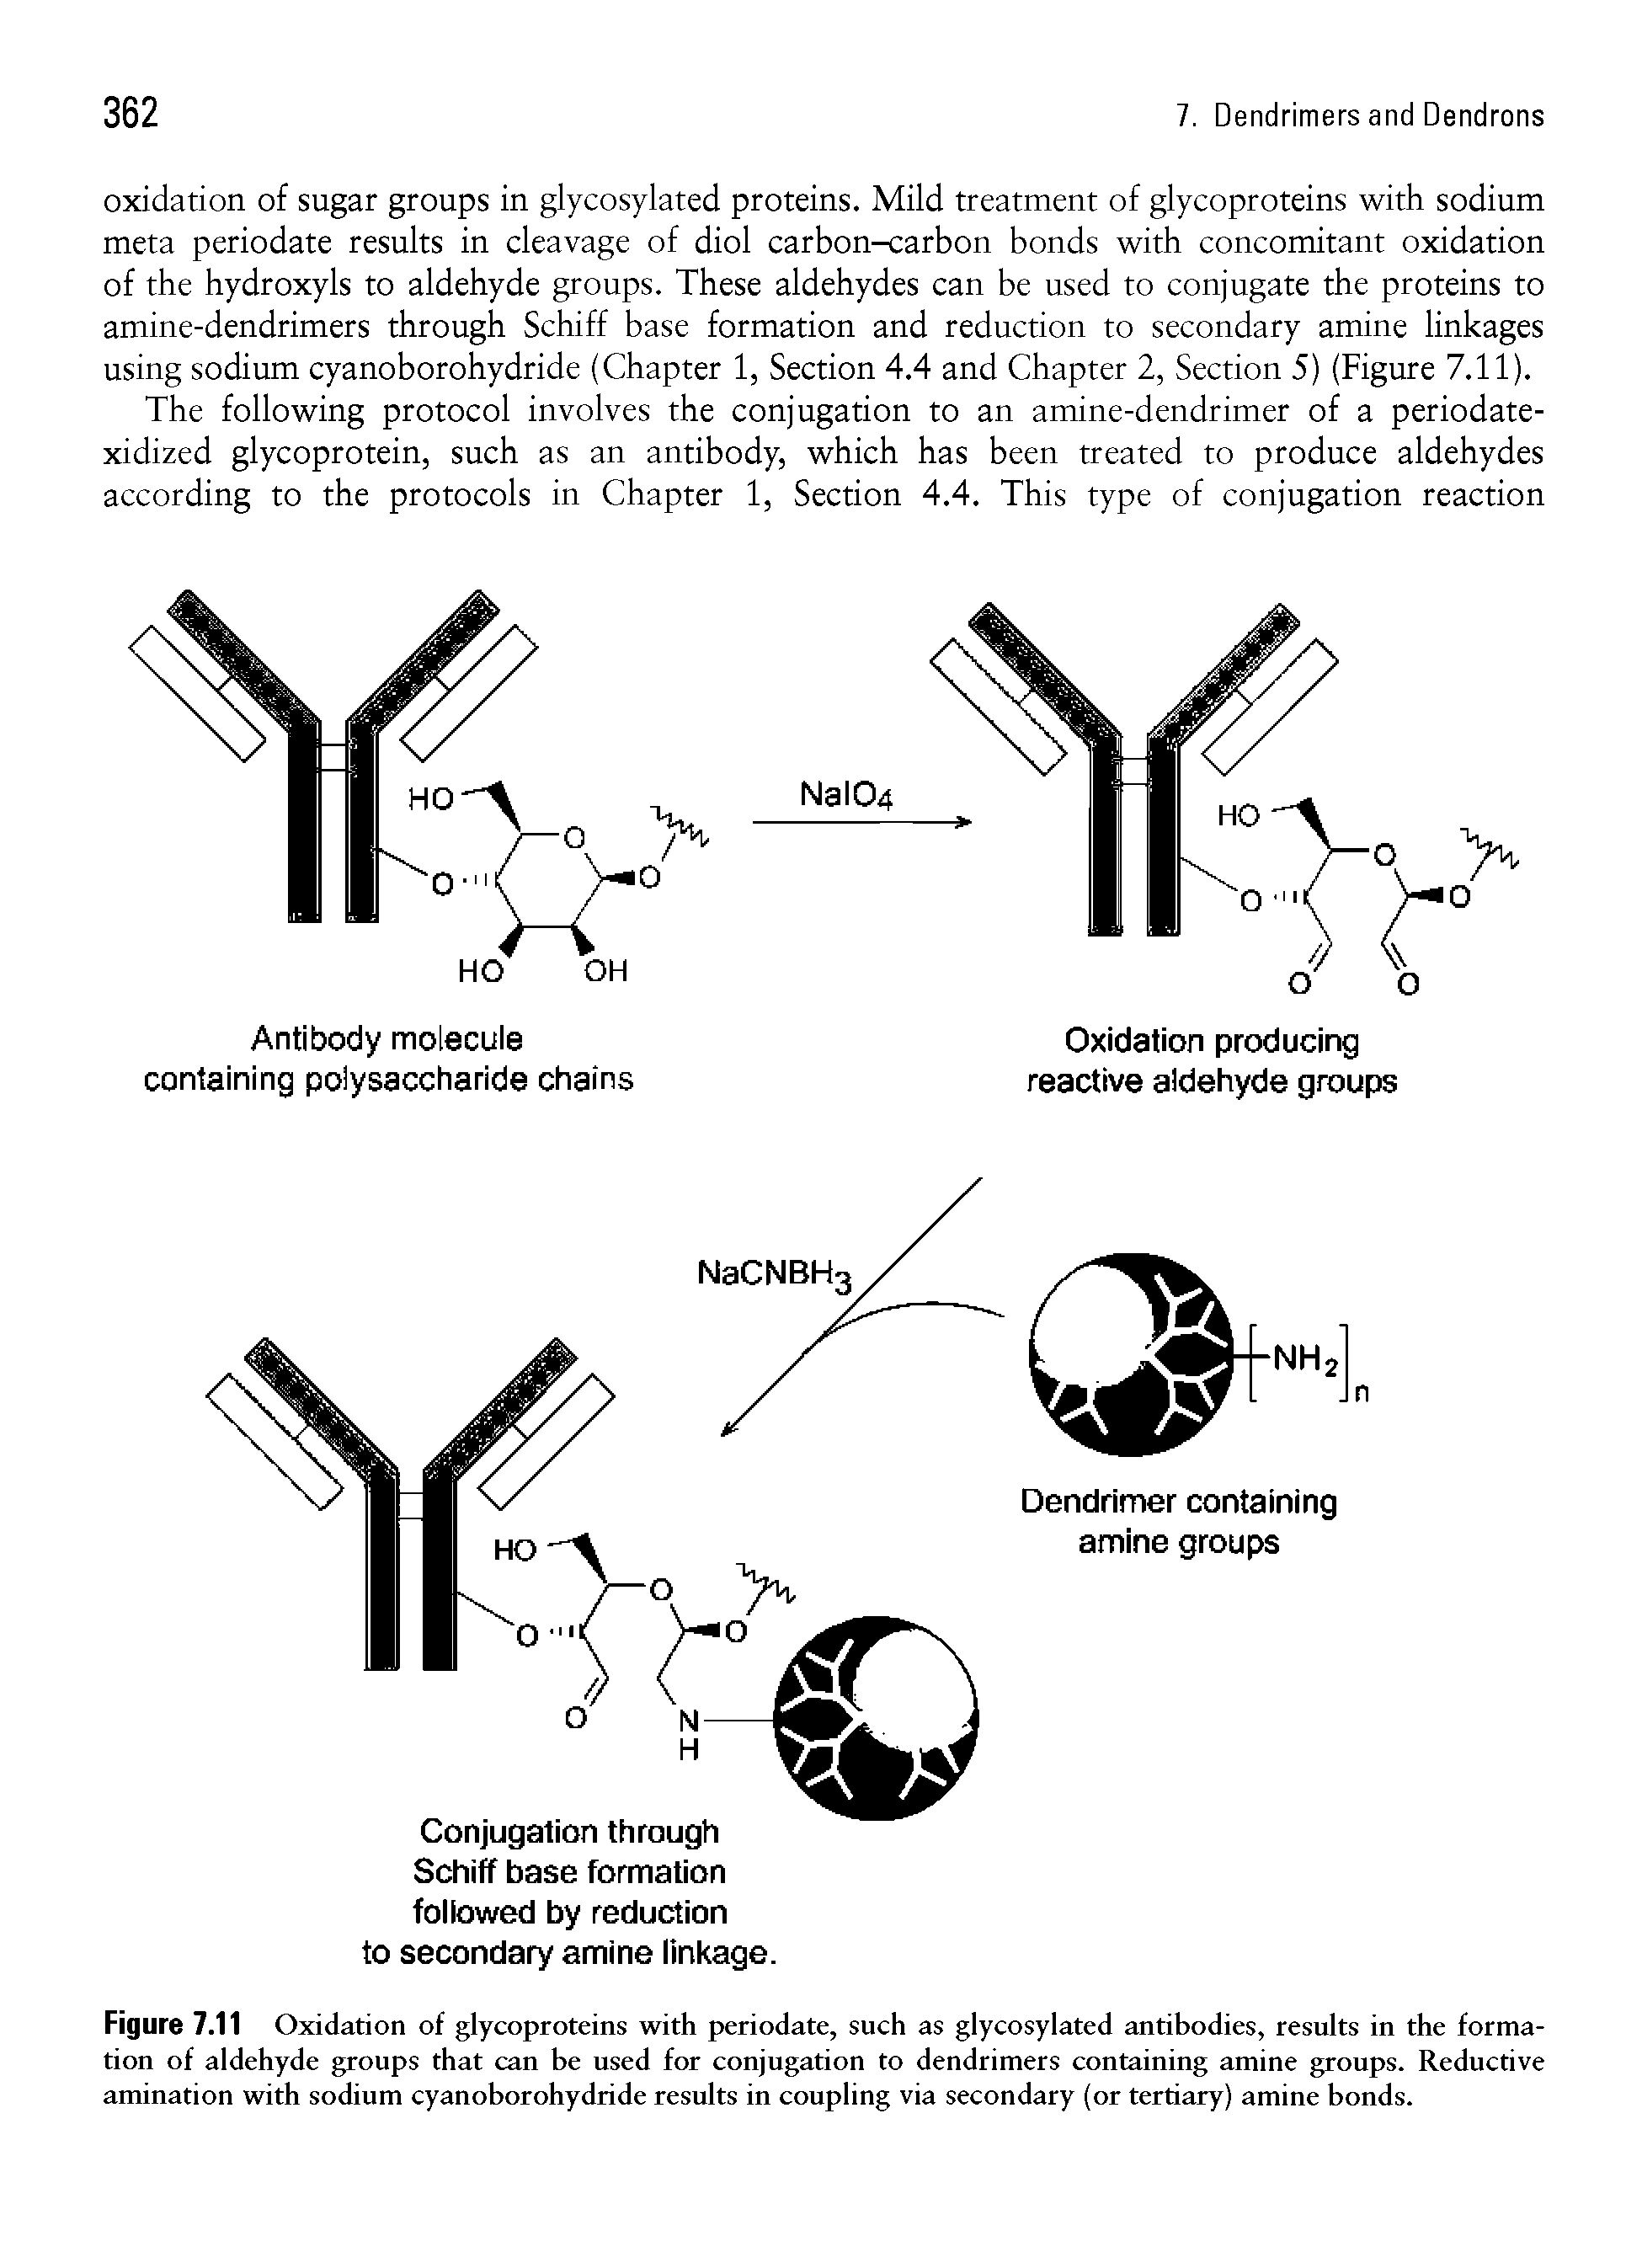 Figure 7.11 Oxidation of glycoproteins with periodate, such as glycosylated antibodies, results in the formation of aldehyde groups that can be used for conjugation to dendrimers containing amine groups. Reductive amination with sodium cyanoborohydride results in coupling via secondary (or tertiary) amine bonds.